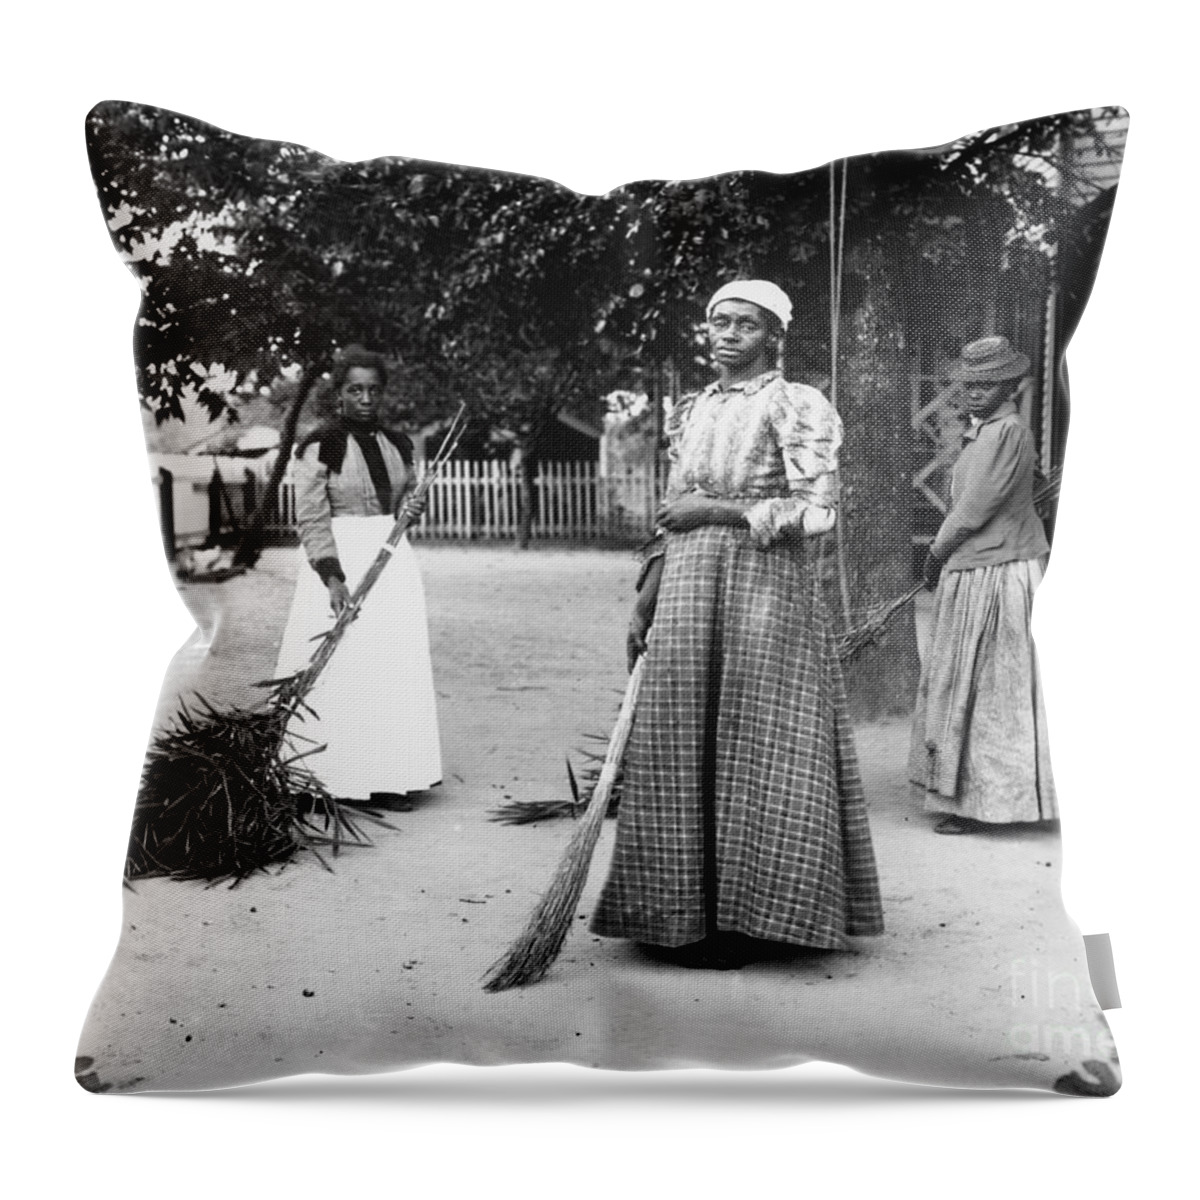 1899 Throw Pillow featuring the photograph Plantation Life #4 by Granger